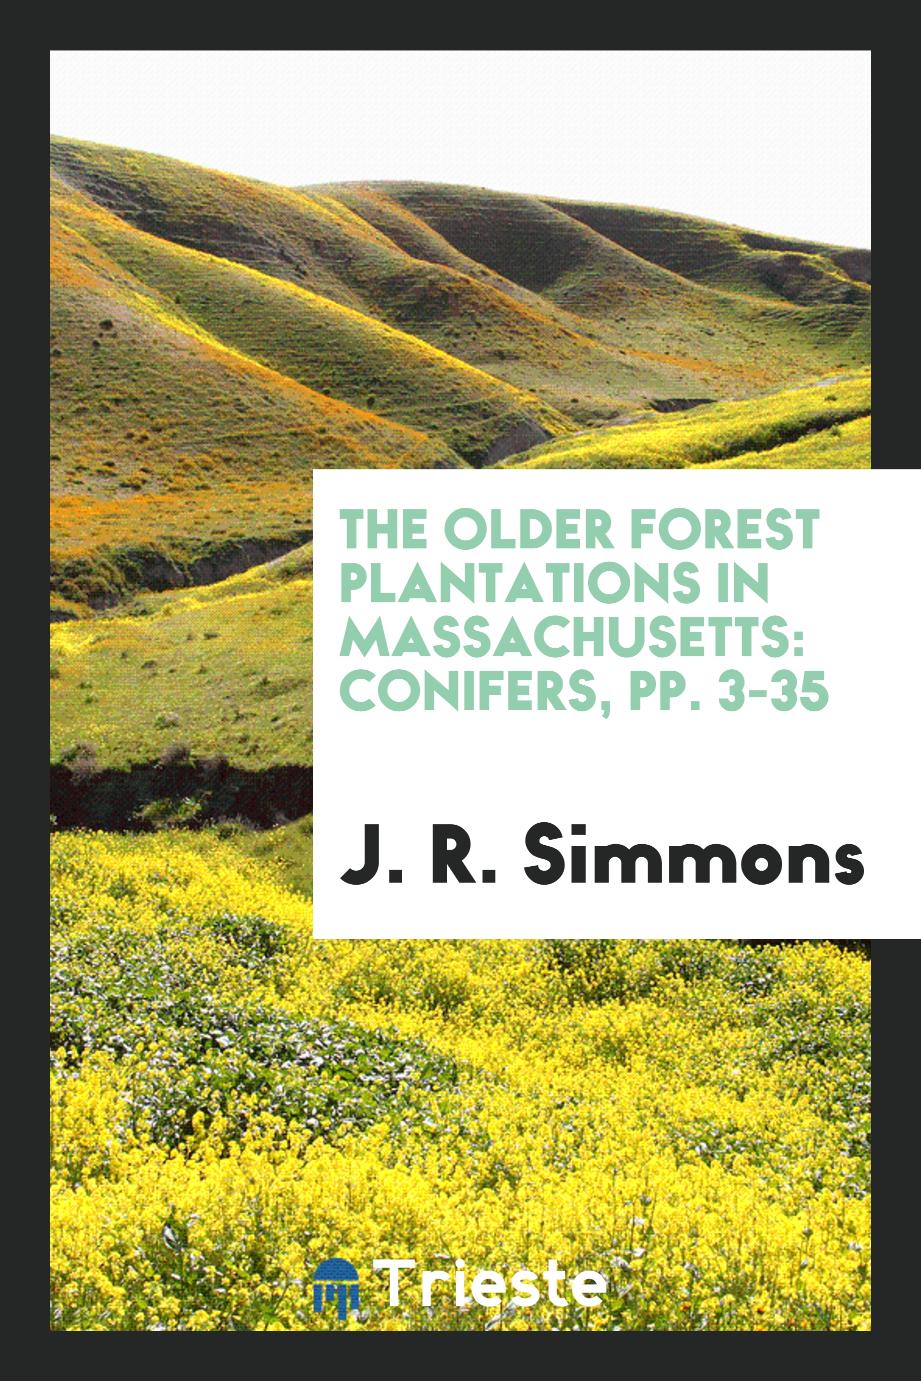 The Older Forest Plantations in Massachusetts: Conifers, pp. 3-35